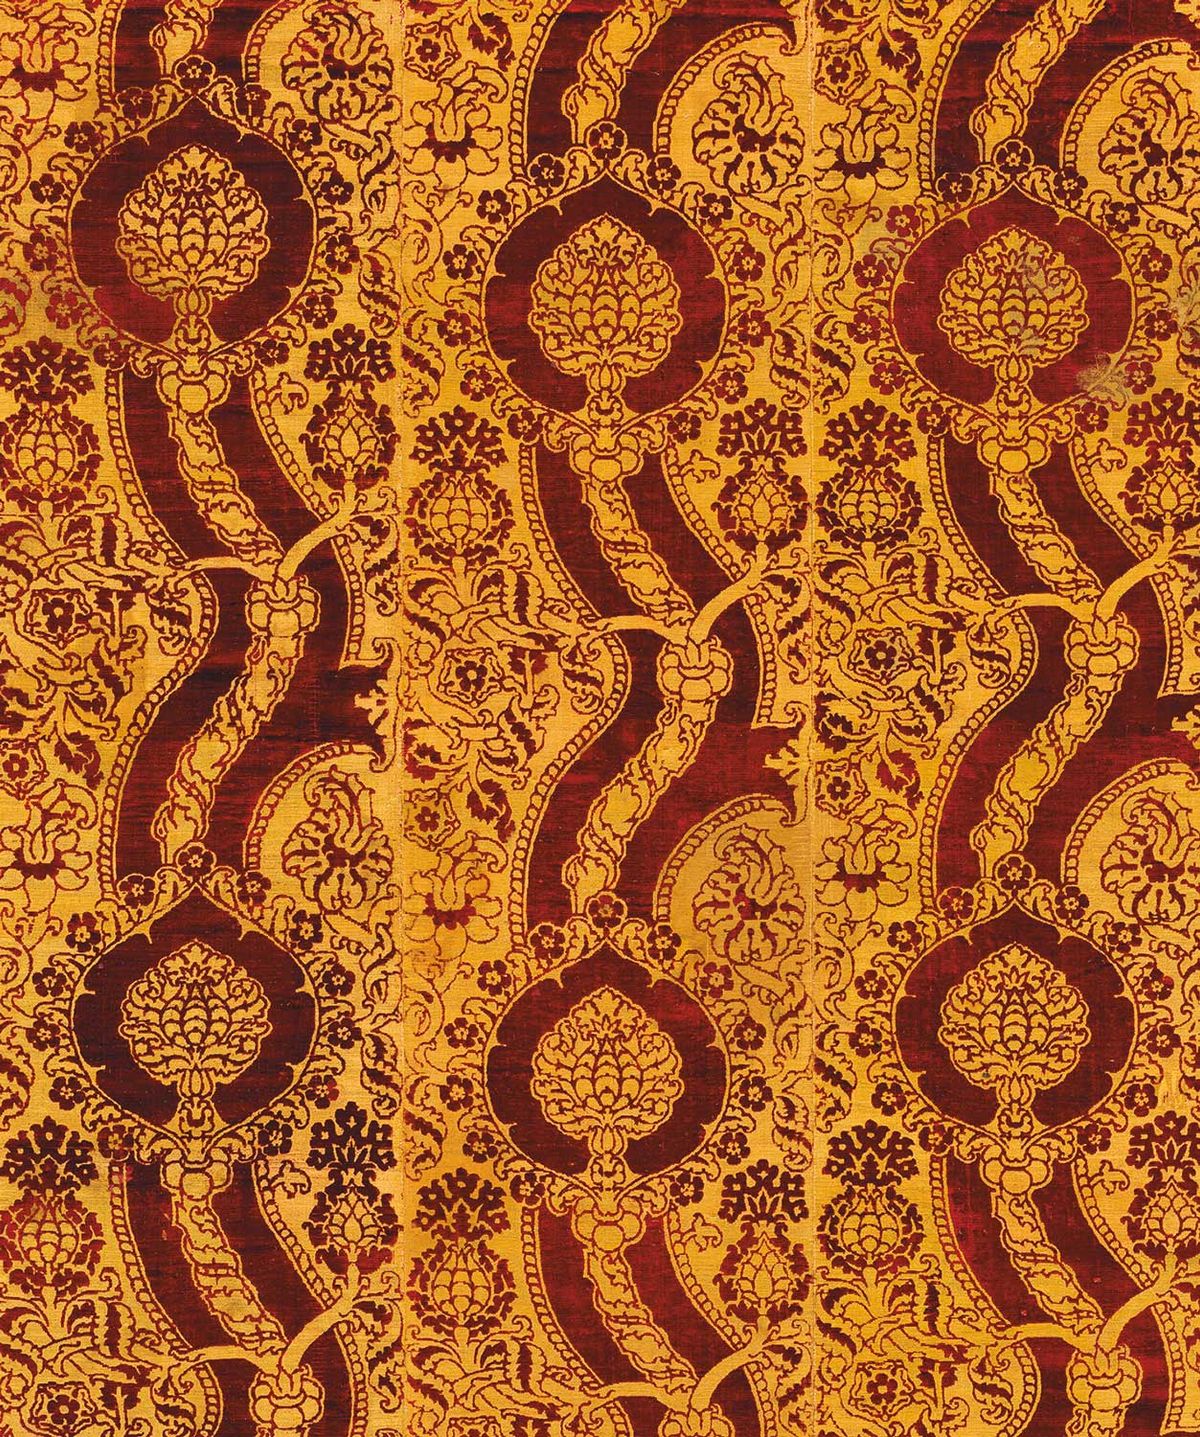 Furnishing textile (late 15th to mid 16th century),the Metropolitan Museum of Art, New York. Could this really be the inspiration for Henry VII’s Tudor Rose? © Victoria and Albert Museum, London